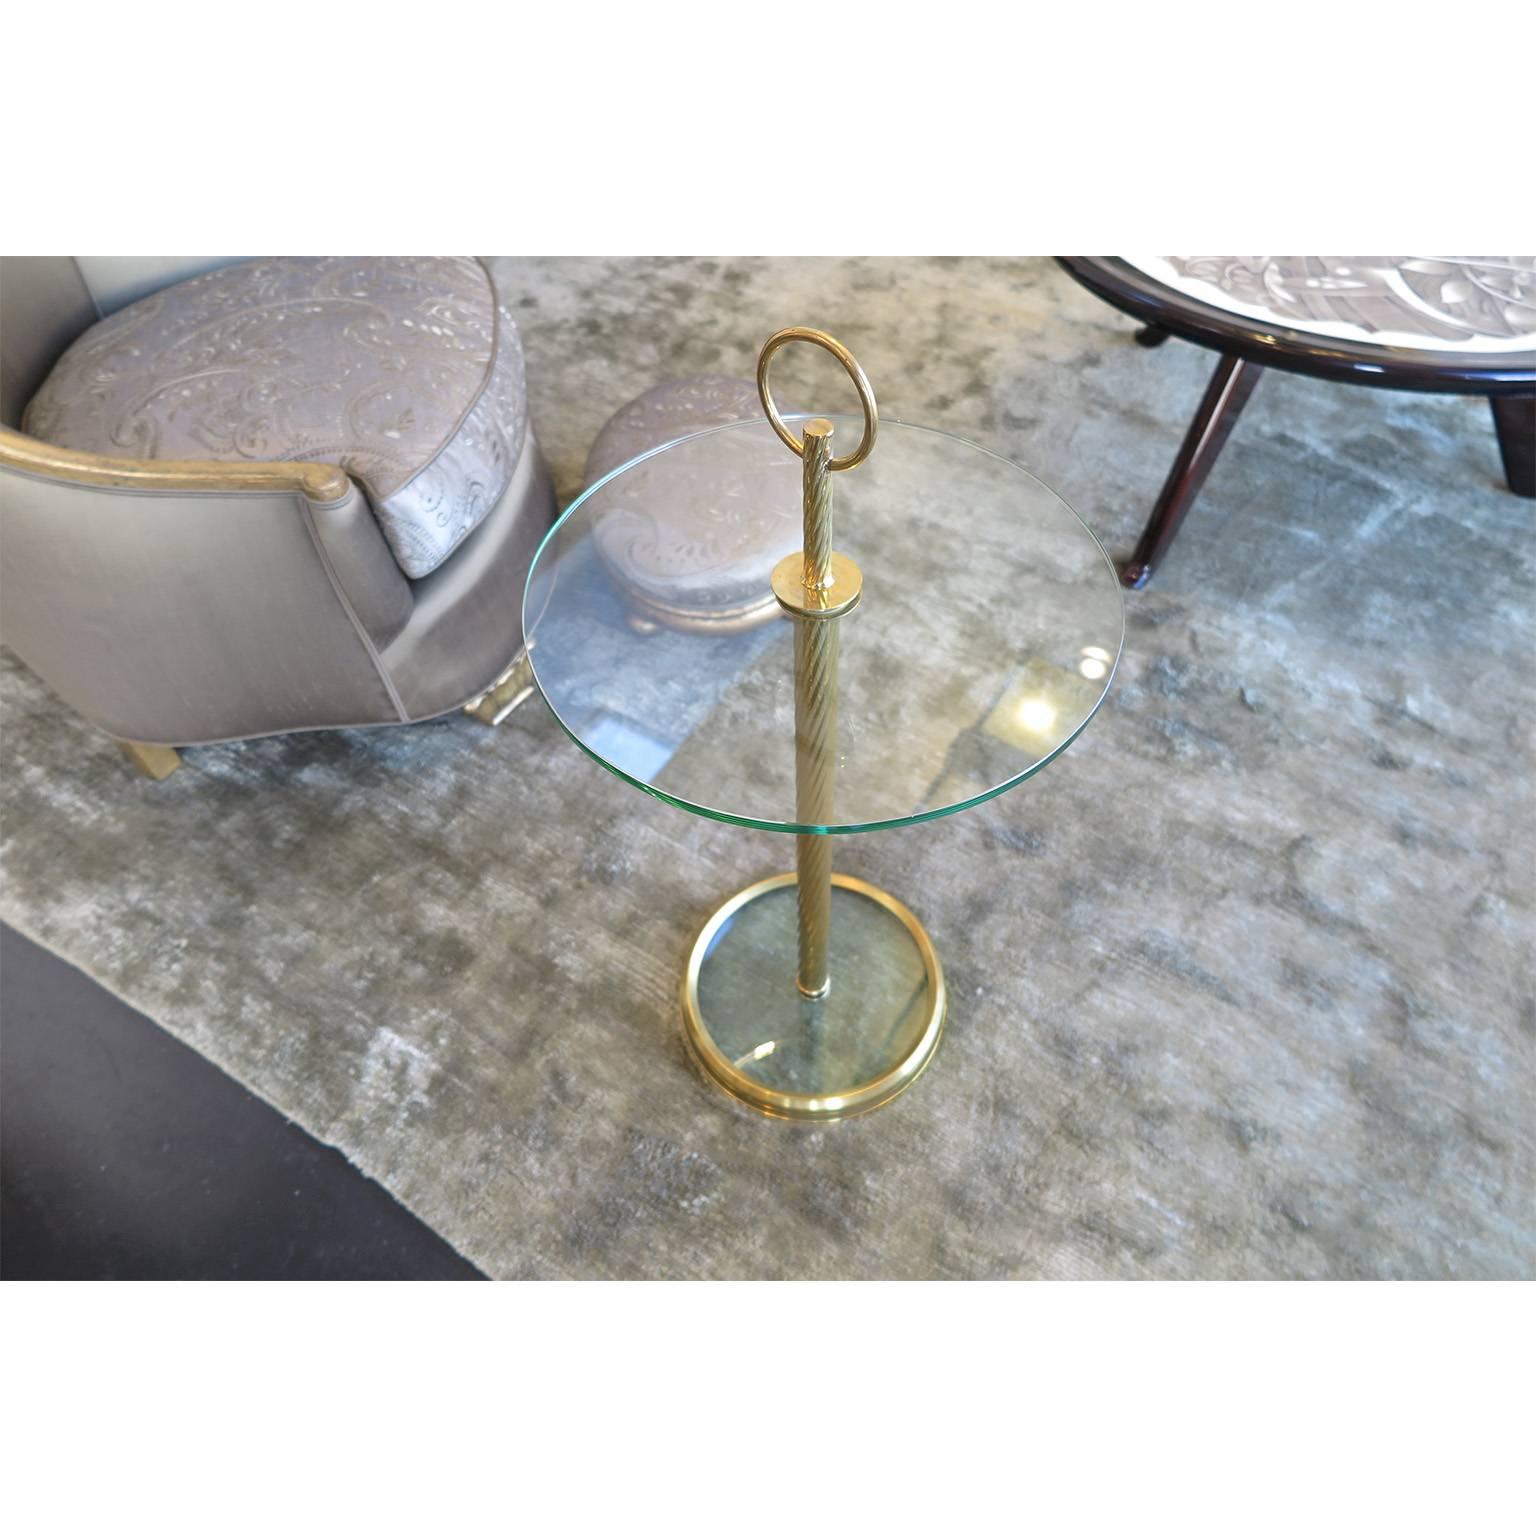 Pair of glass & brass round side tables from France c. 1940's -1950's.  Design by Hermes. Each table has a twisted brass stem with an over-sized ring on top.   